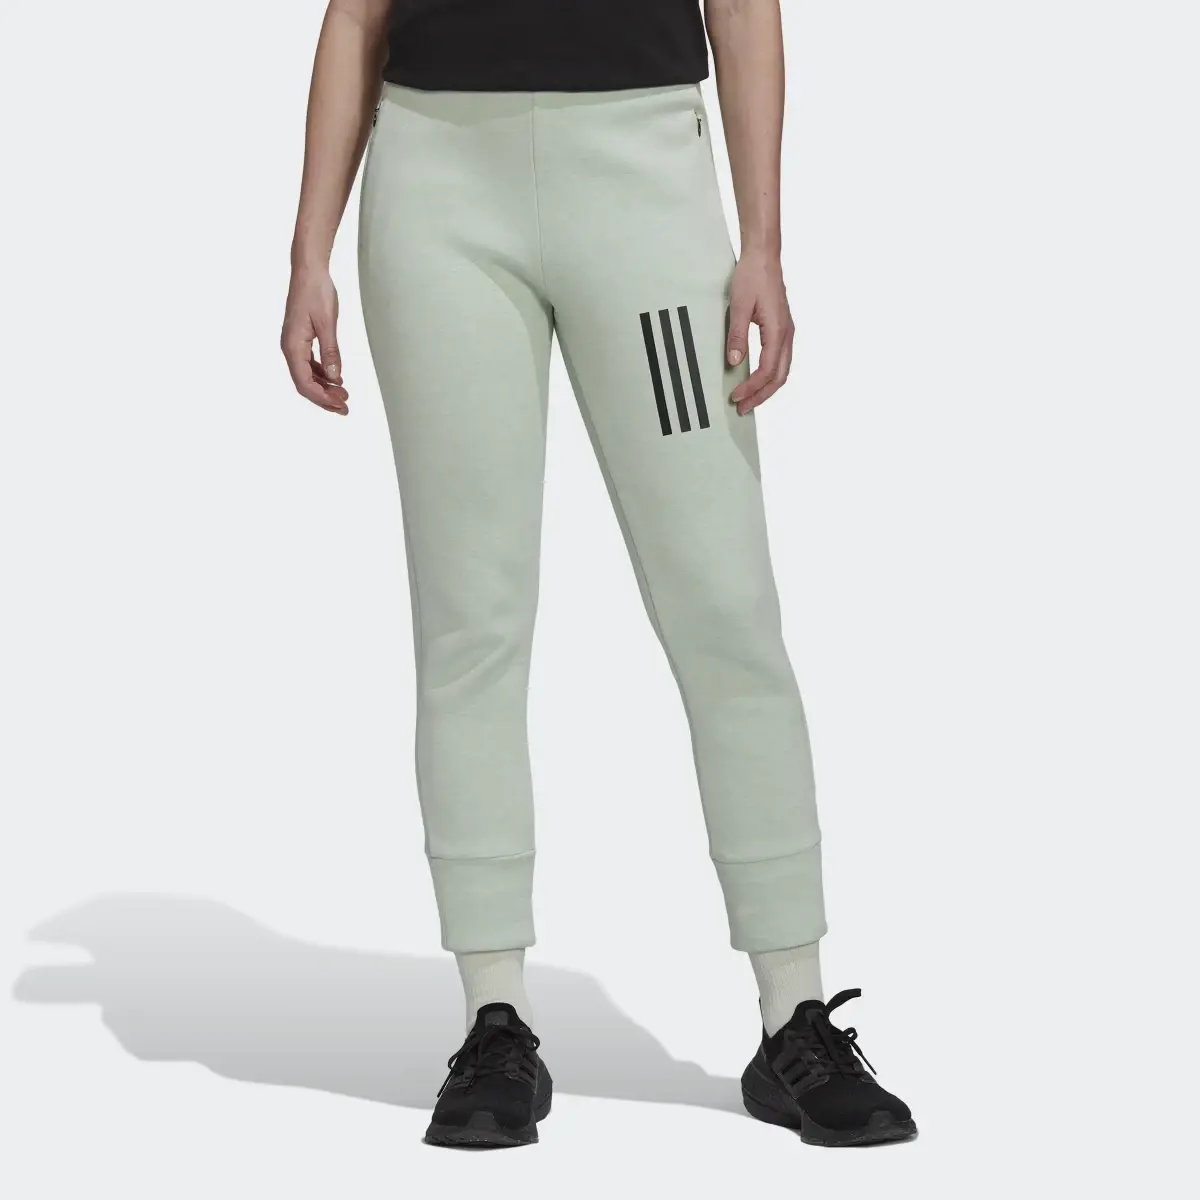 Adidas Mission Victory Slim-Fit High-Waist Tracksuit Bottoms. 1